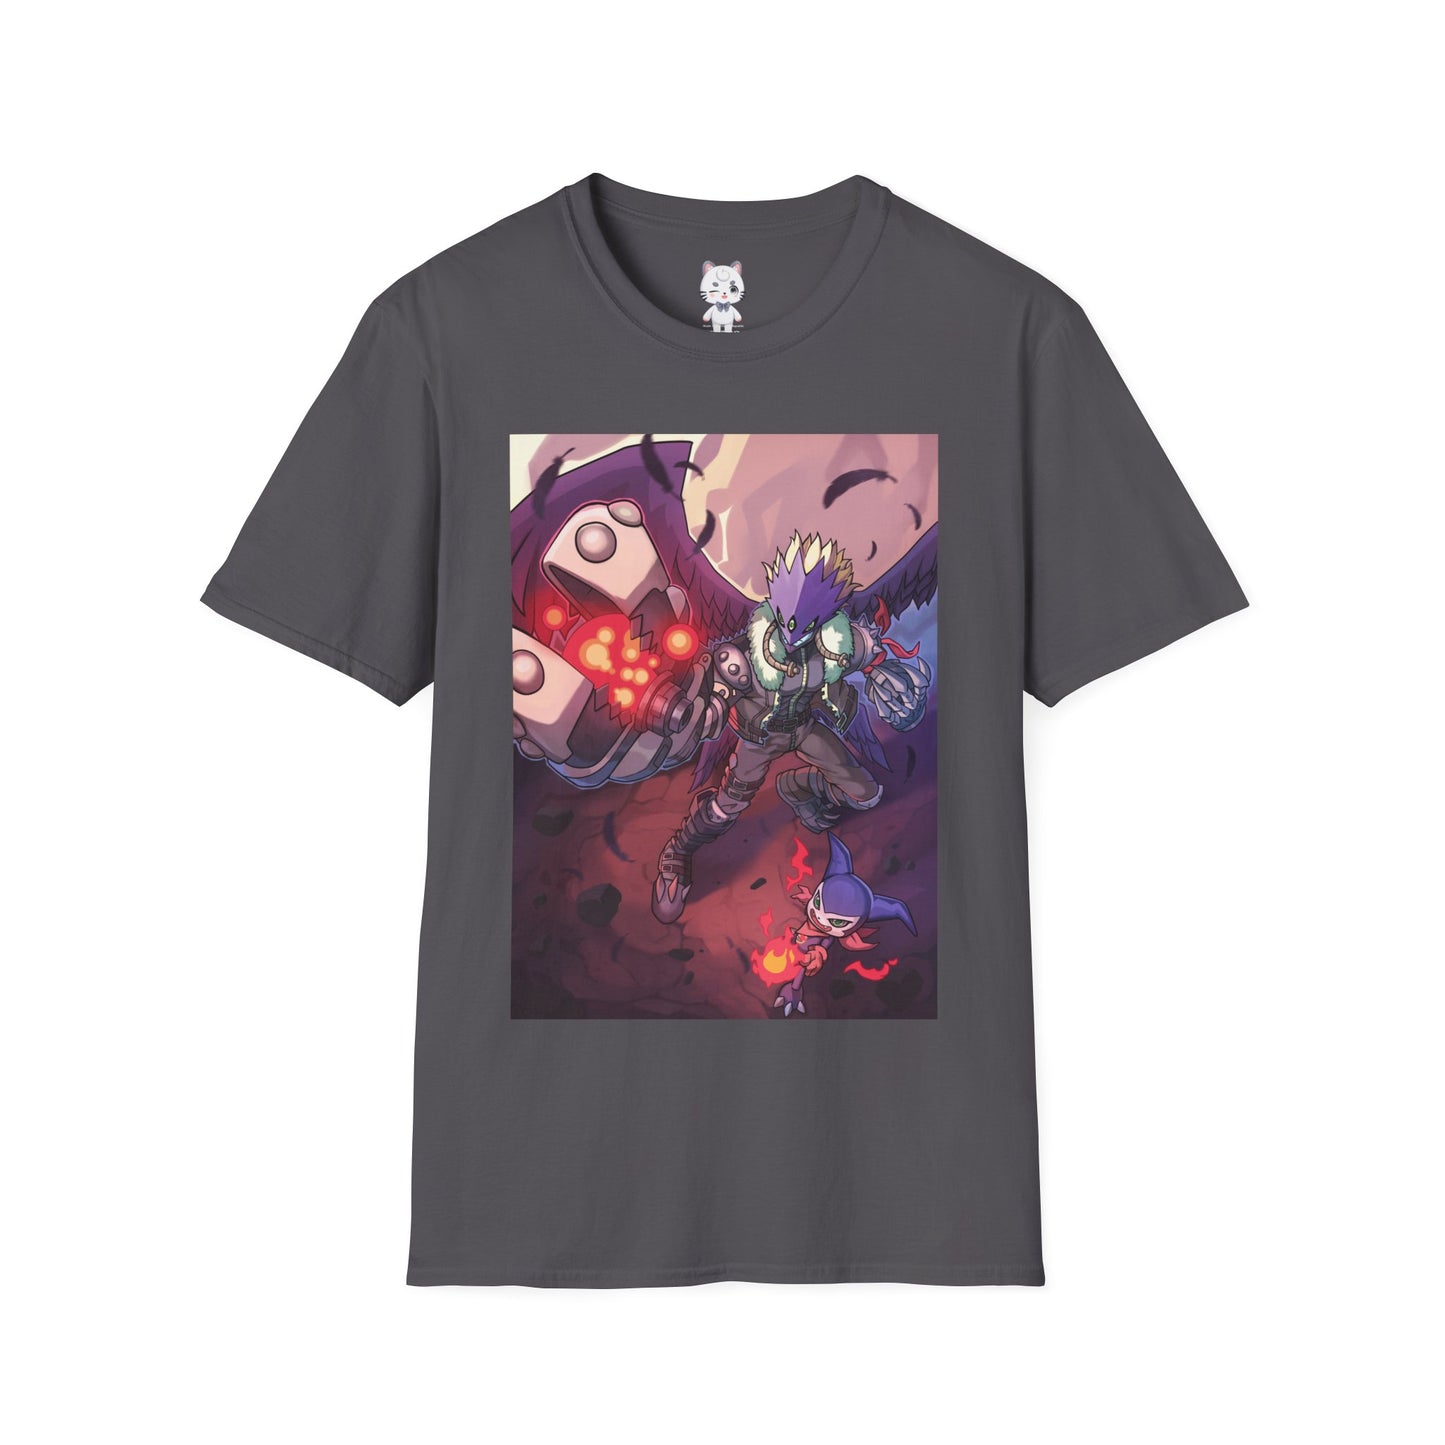 Digimon Beelzemon T-Shirt Design by Currynoodleart